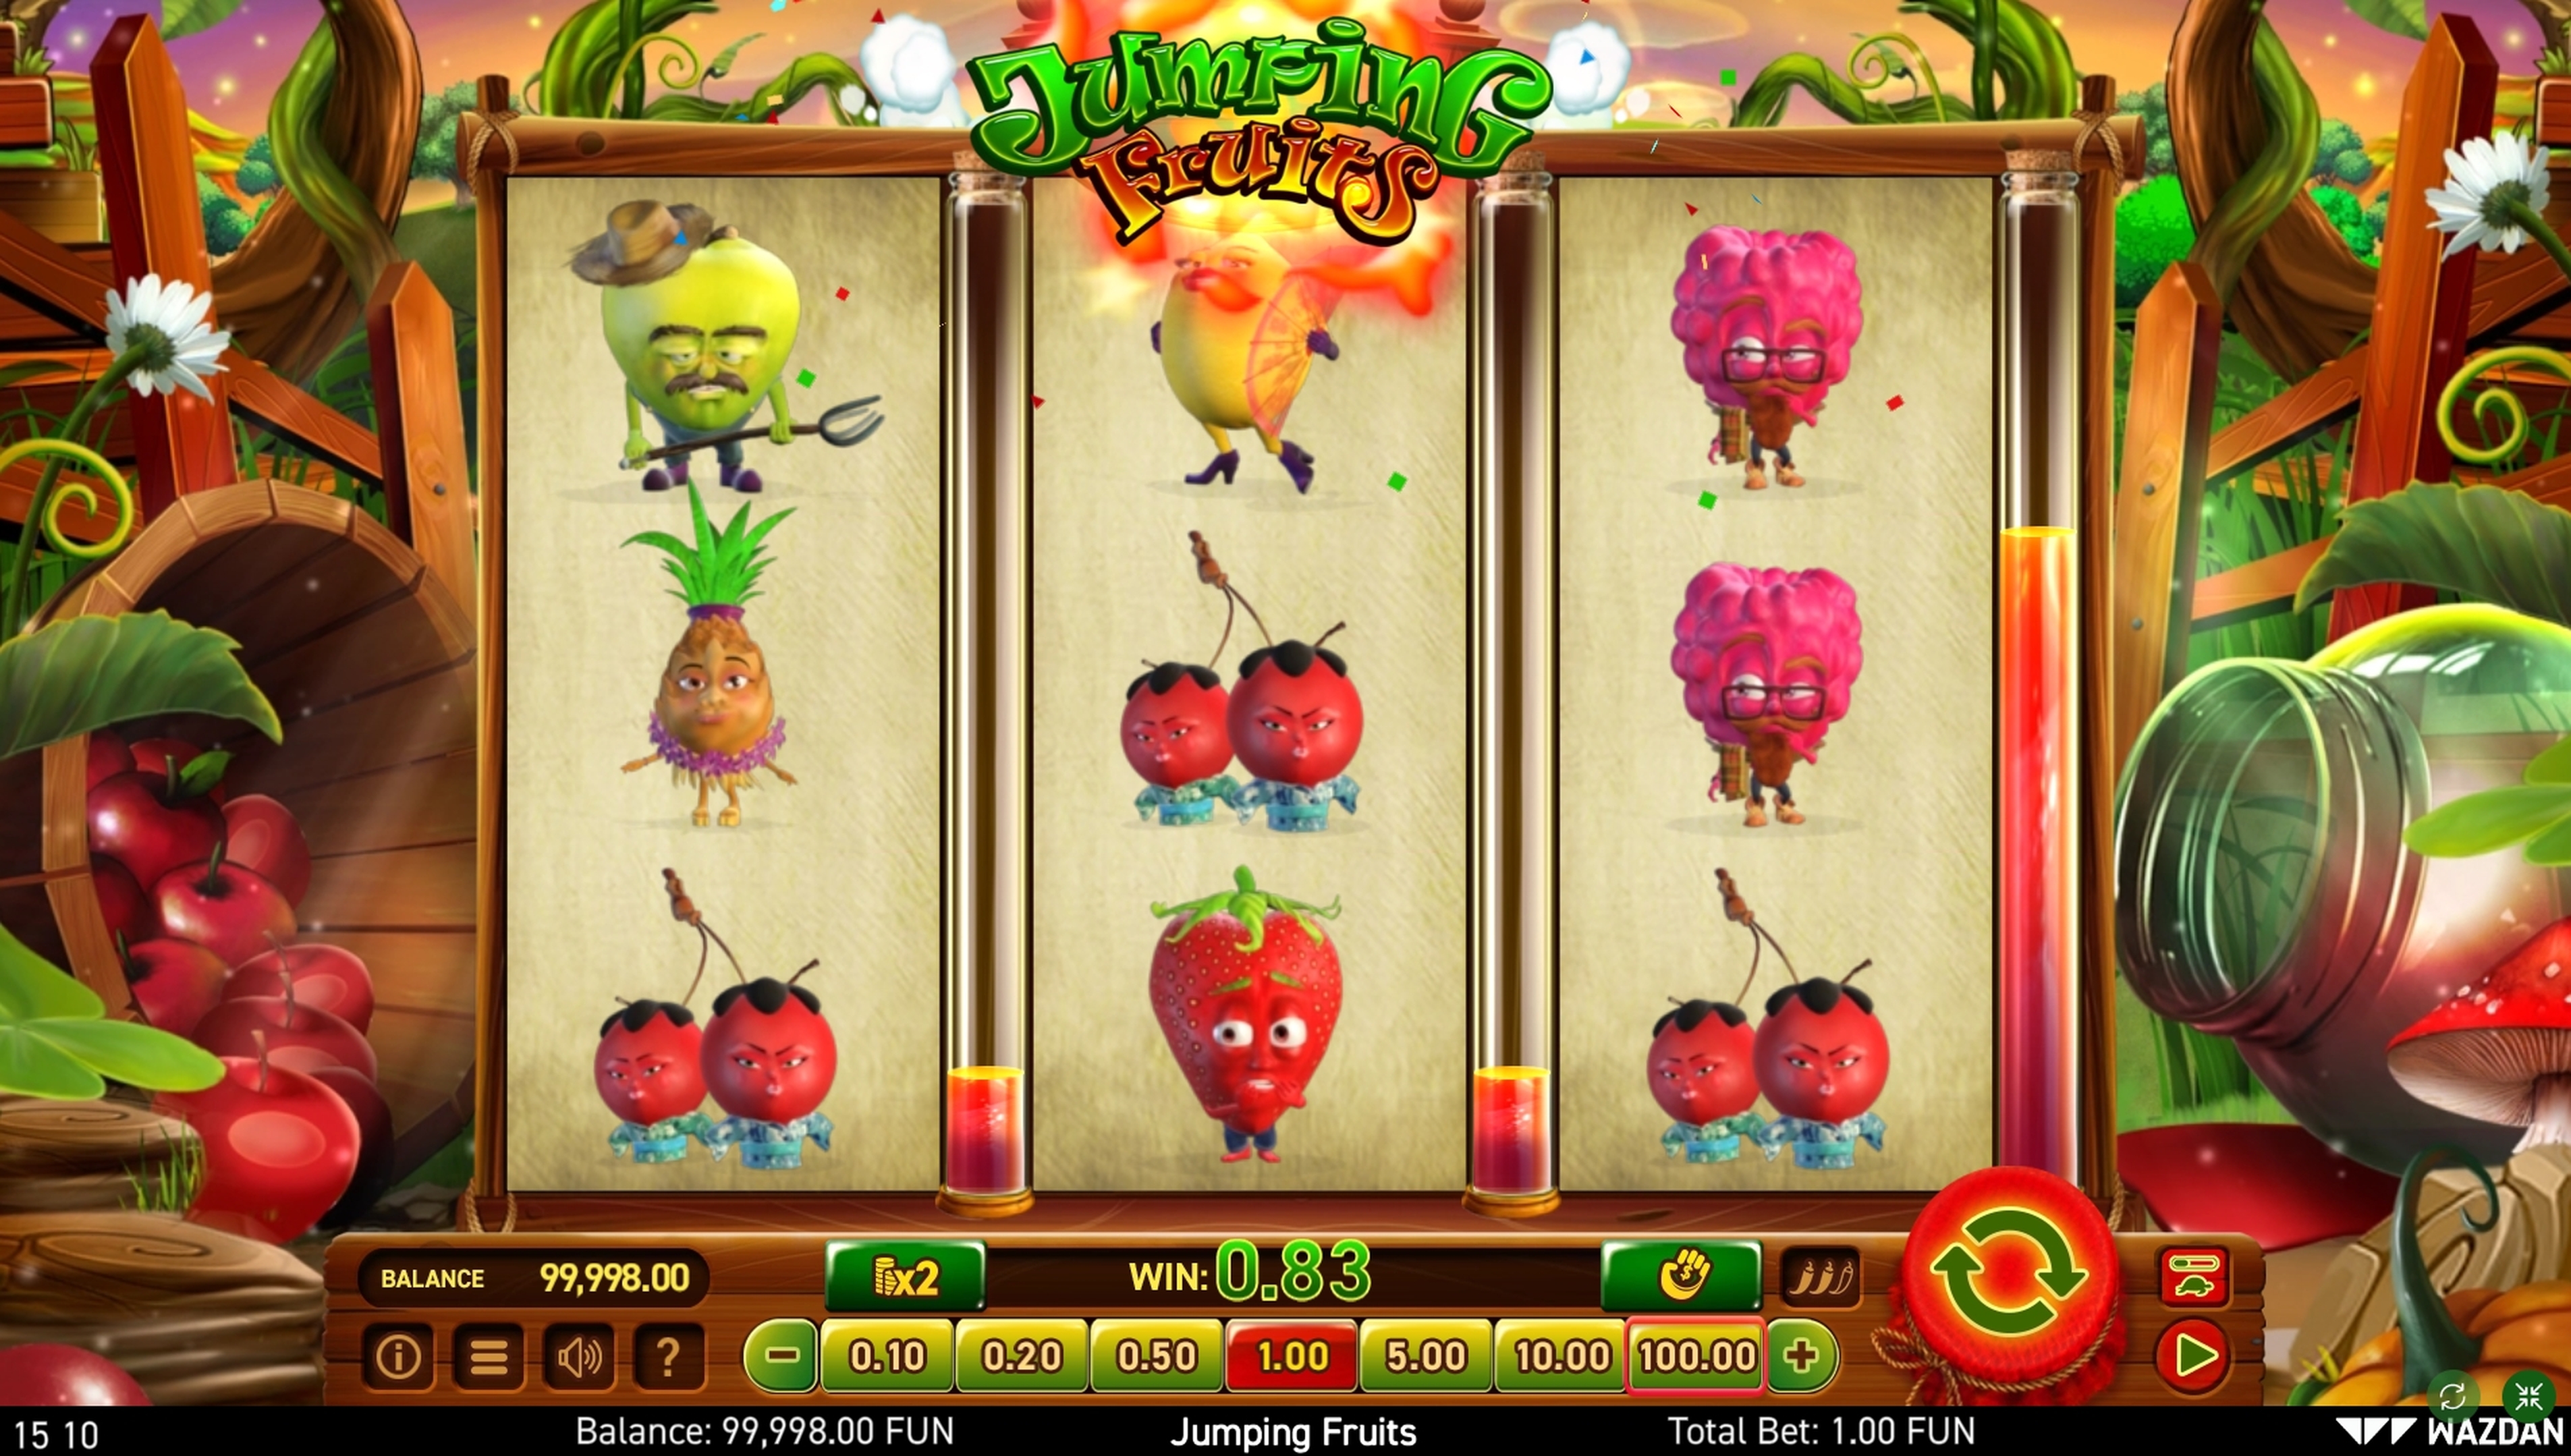 Win Money in Jumping Fruits Free Slot Game by Wazdan